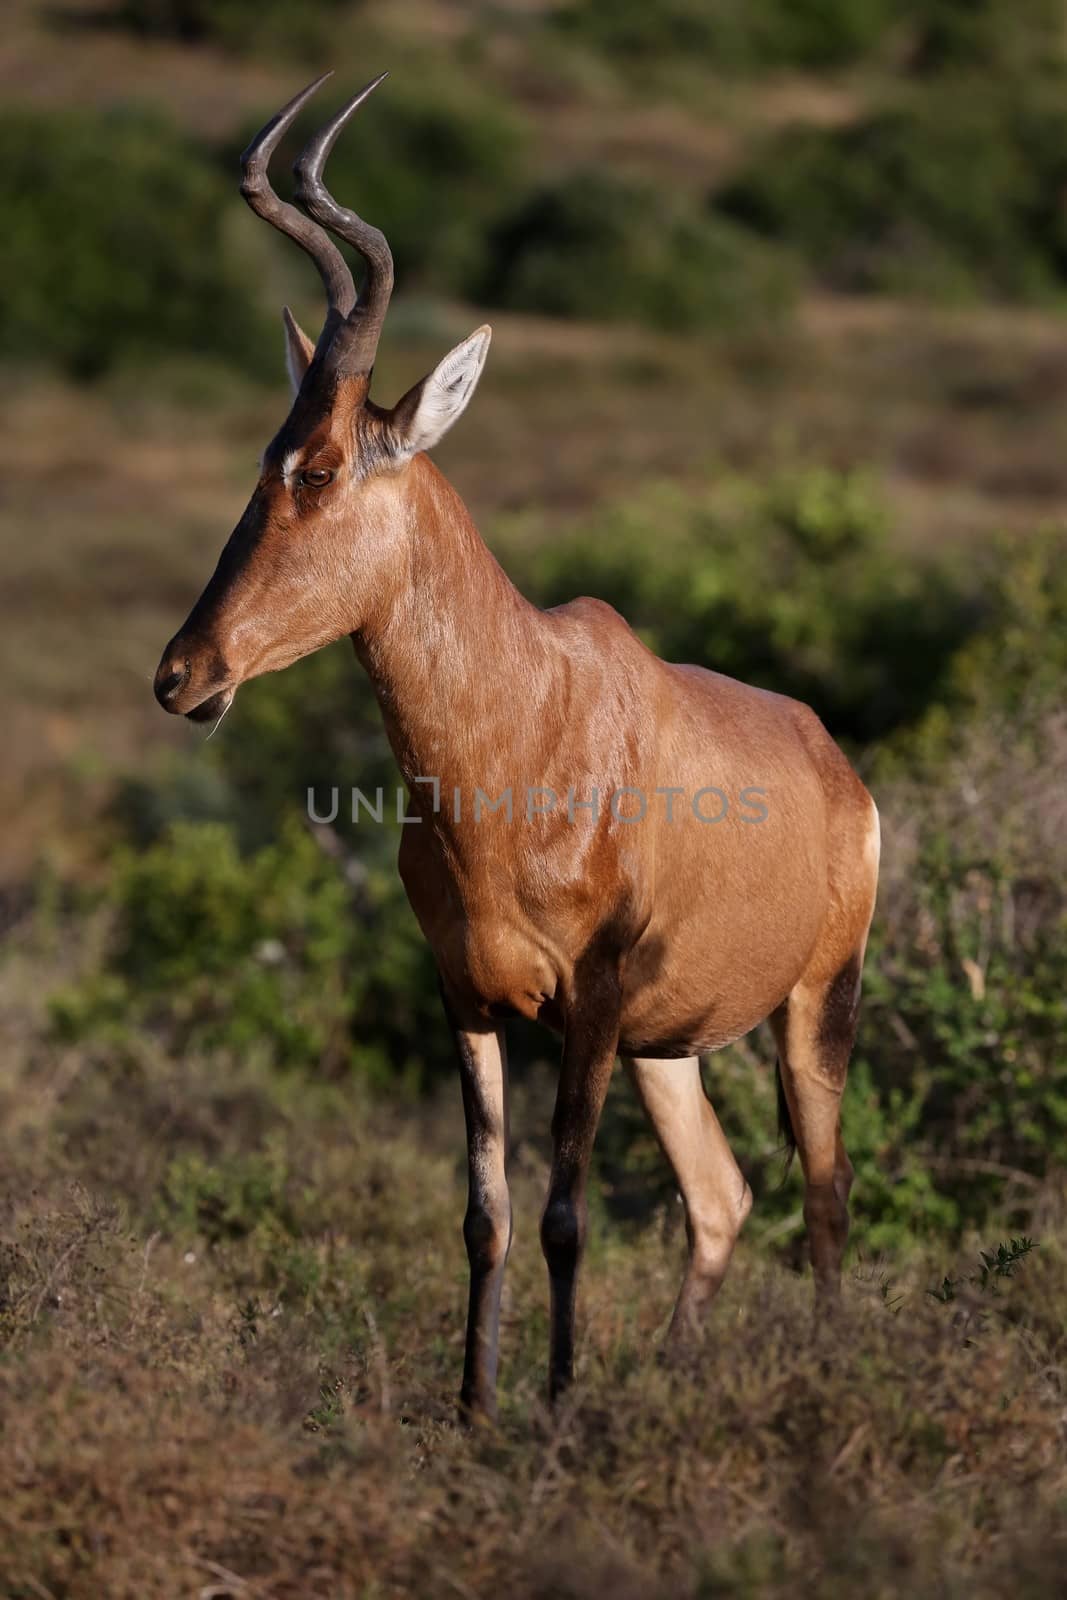 Graceful looking Red Hartebeest Antelope with curved horns